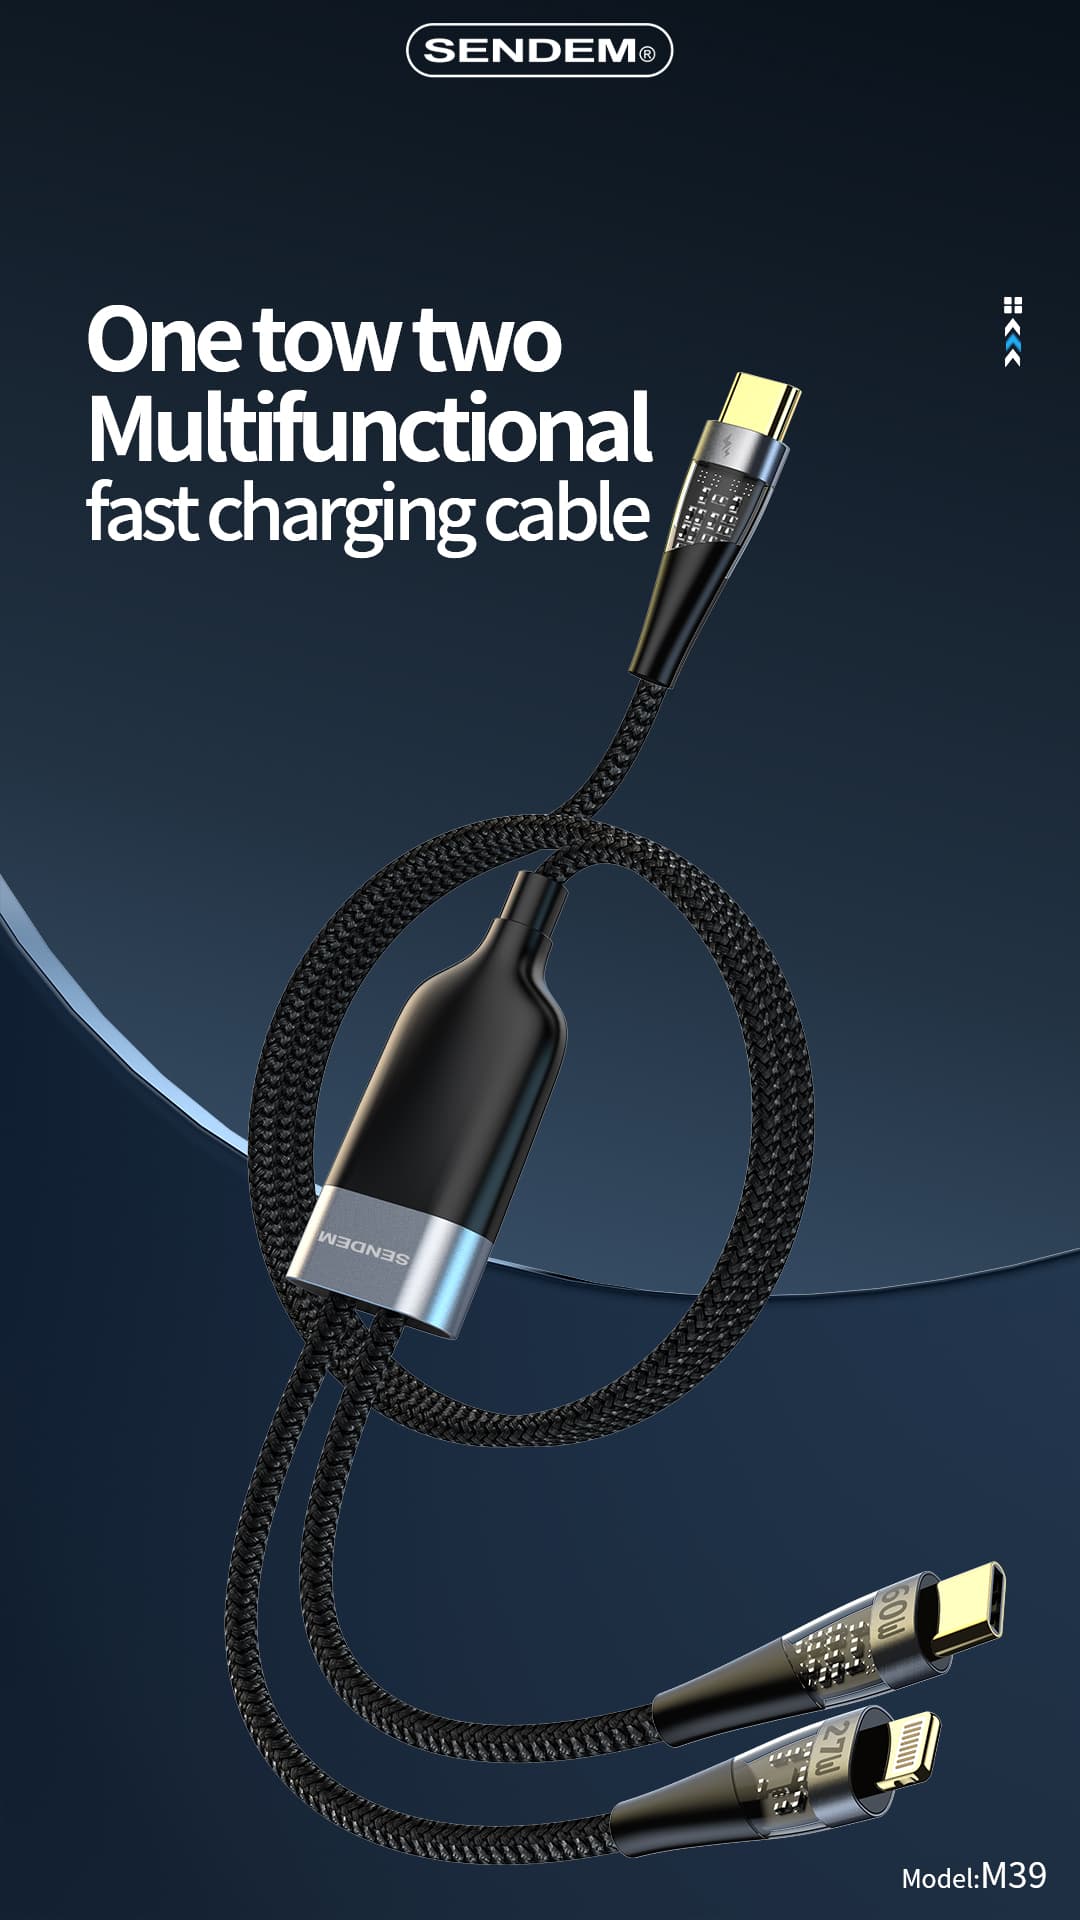 M39-Perspettiva serje 1 drag 2 Fast Charging Cable (1)